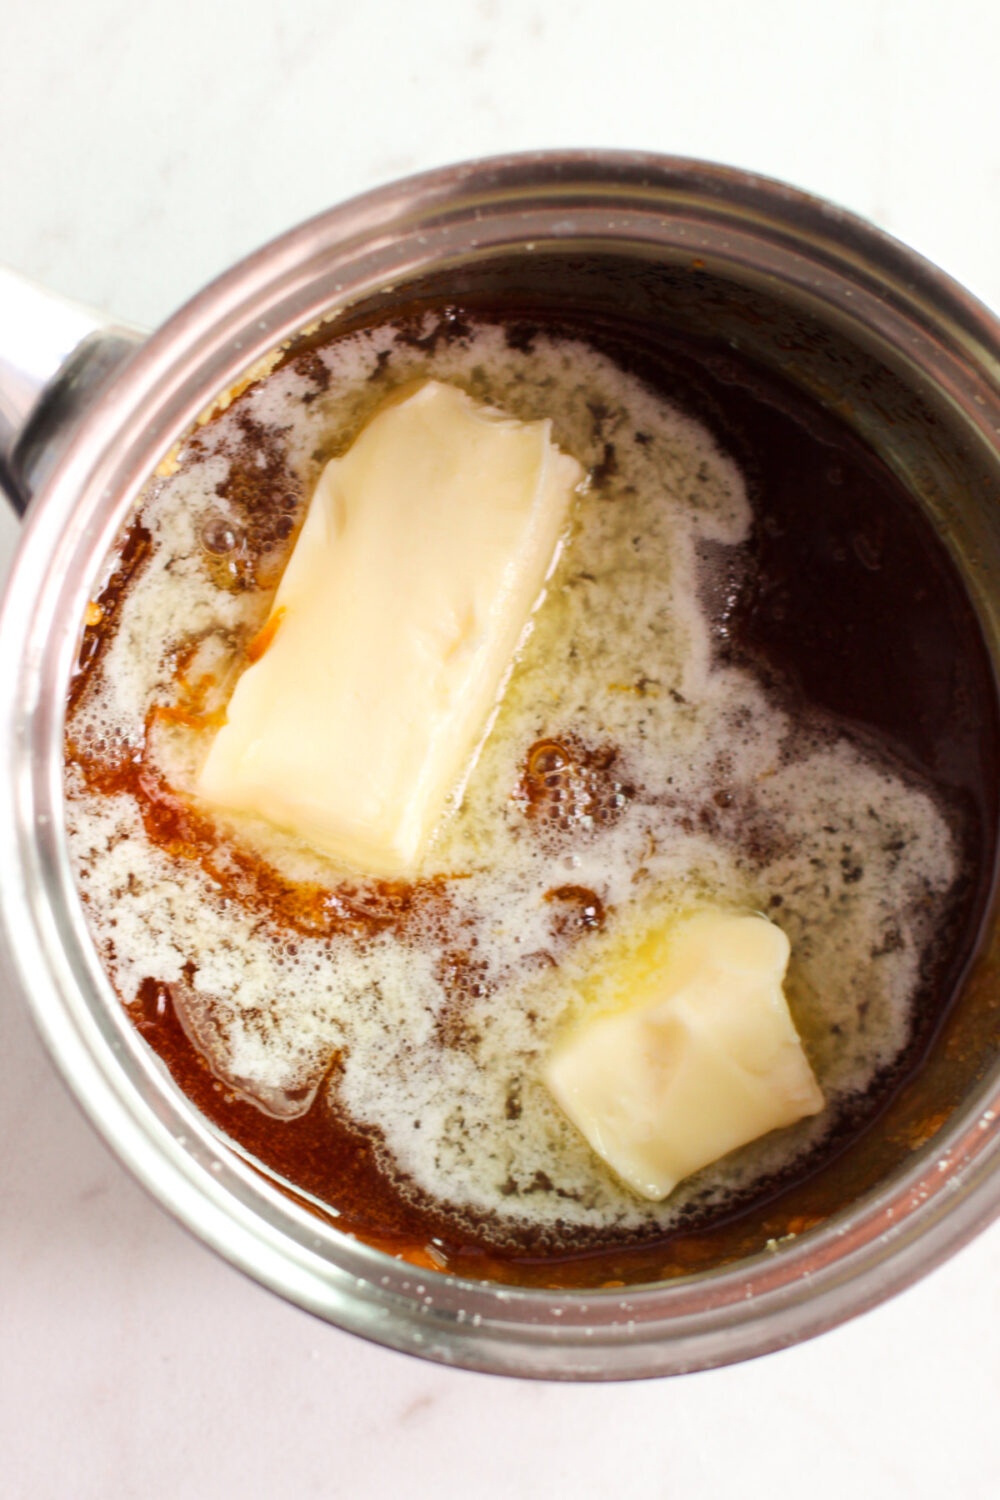 Butter in a sauce pan with melted sugar. 